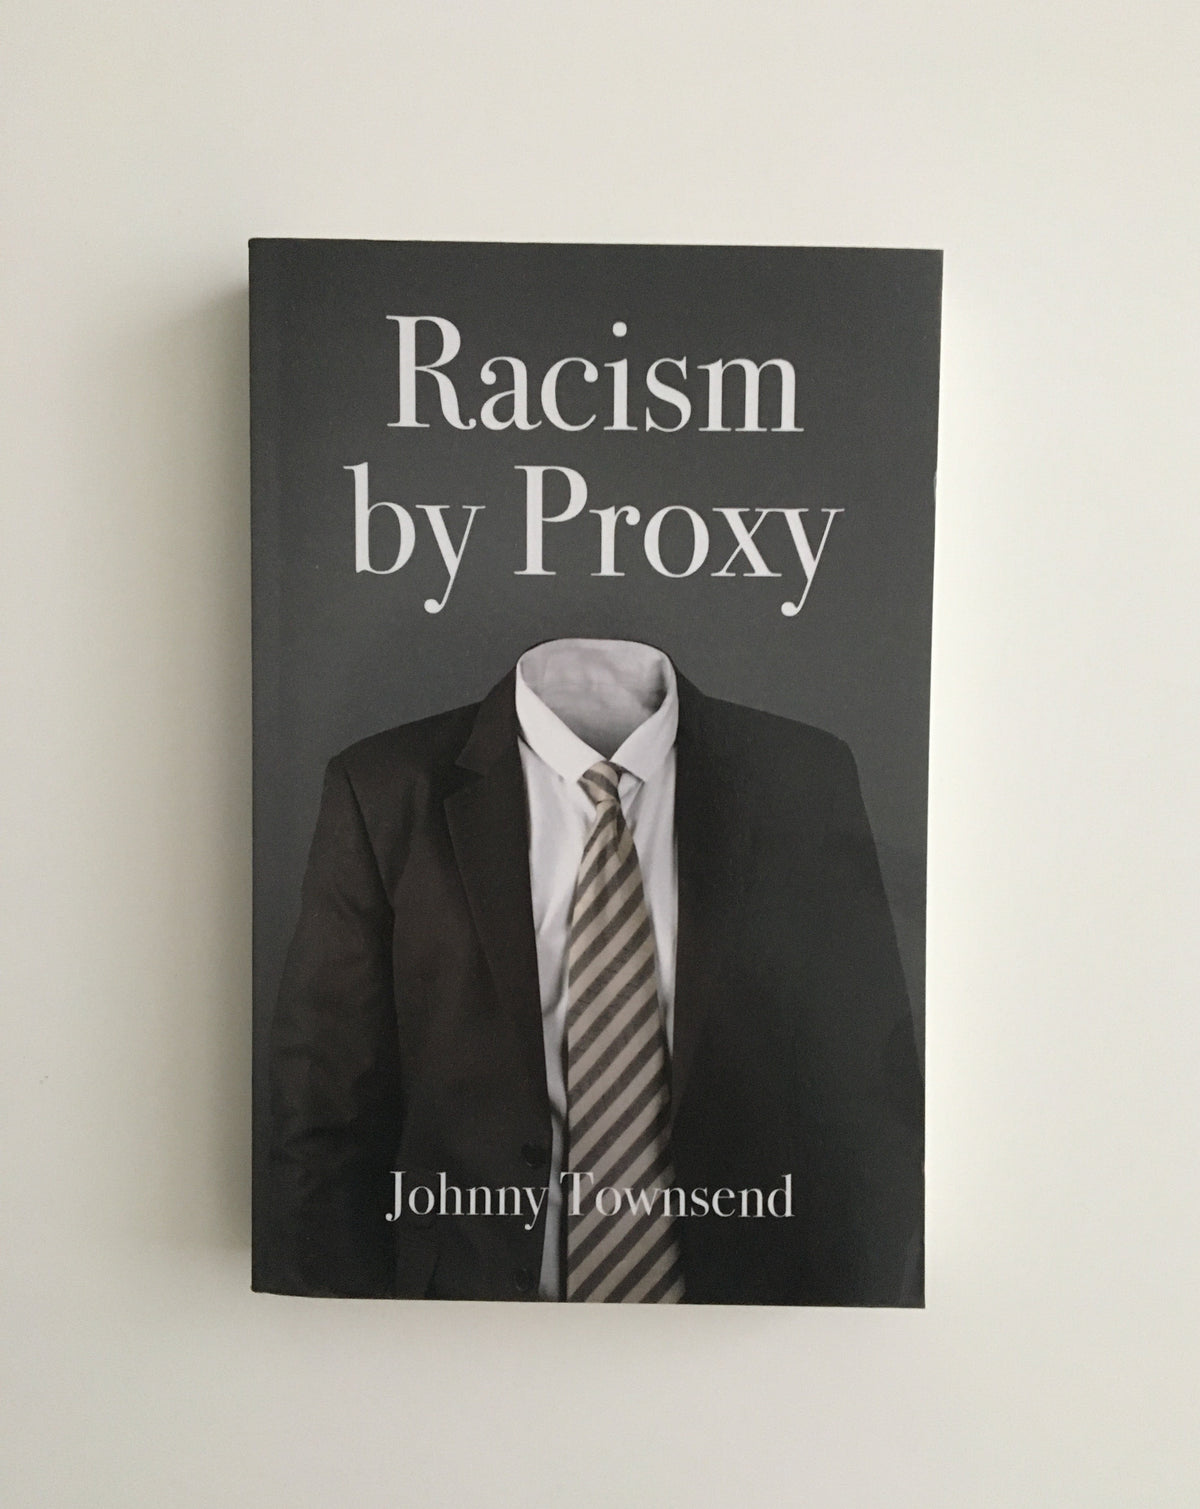 Racism by Proxy by Johnny Townsend